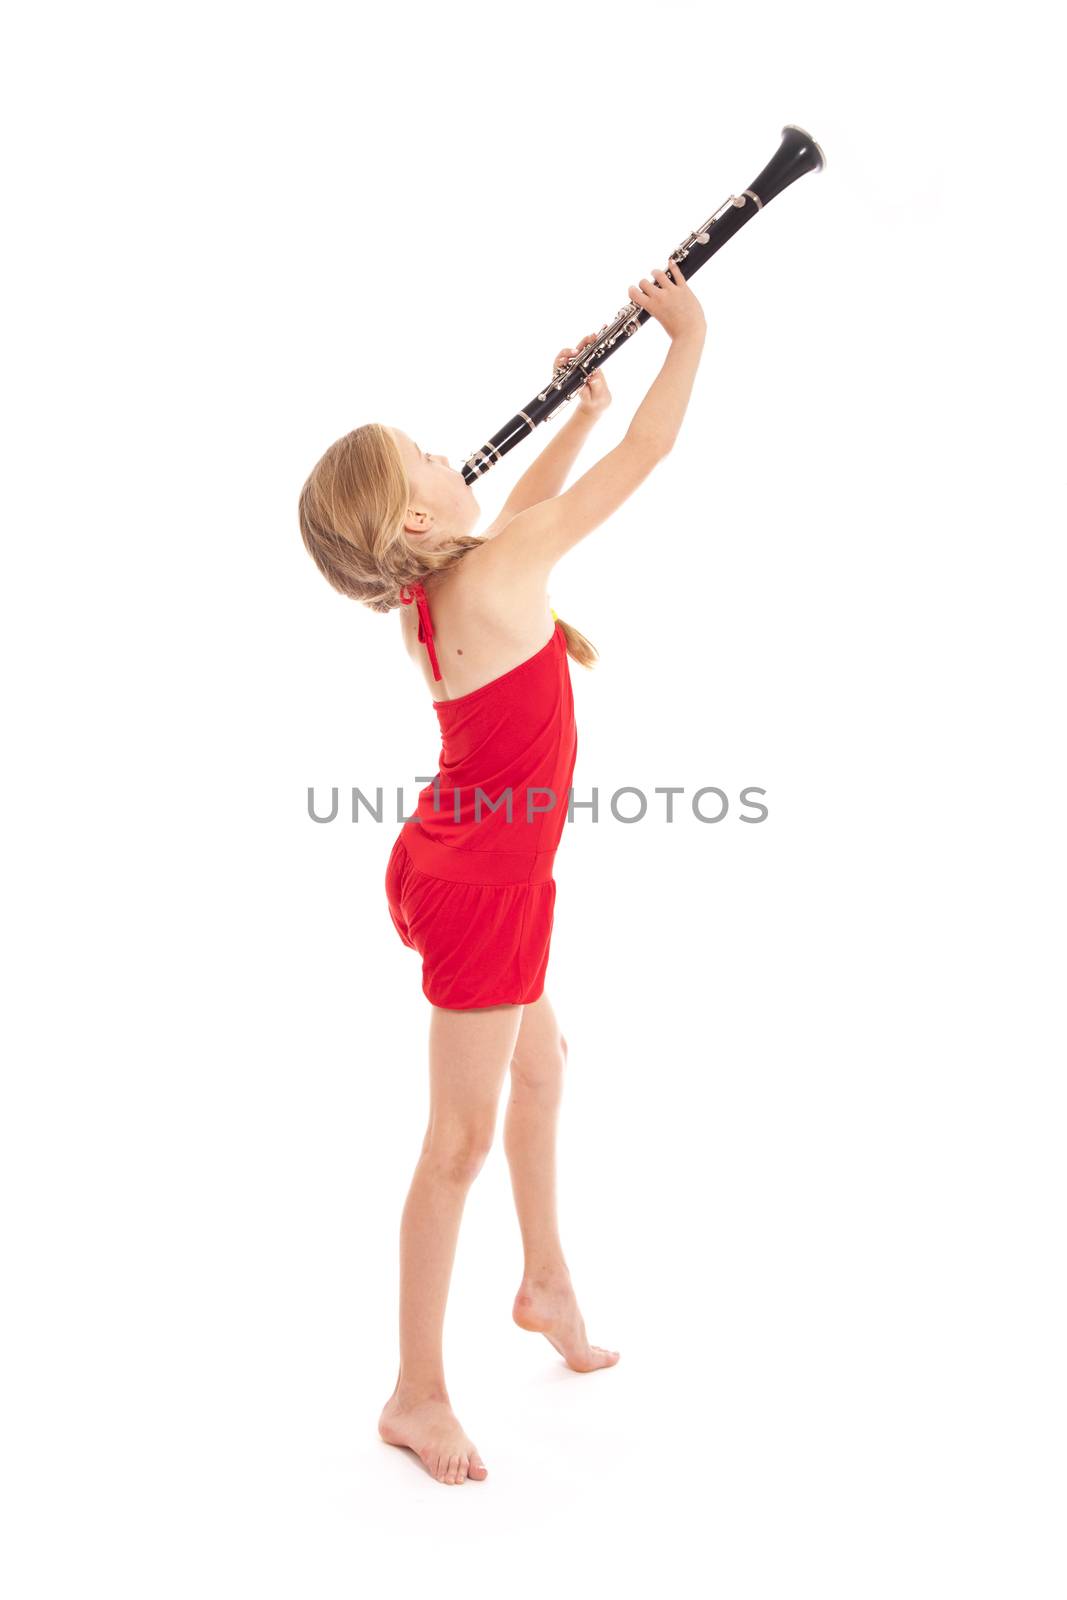 young girl in red playing clarinet against white background